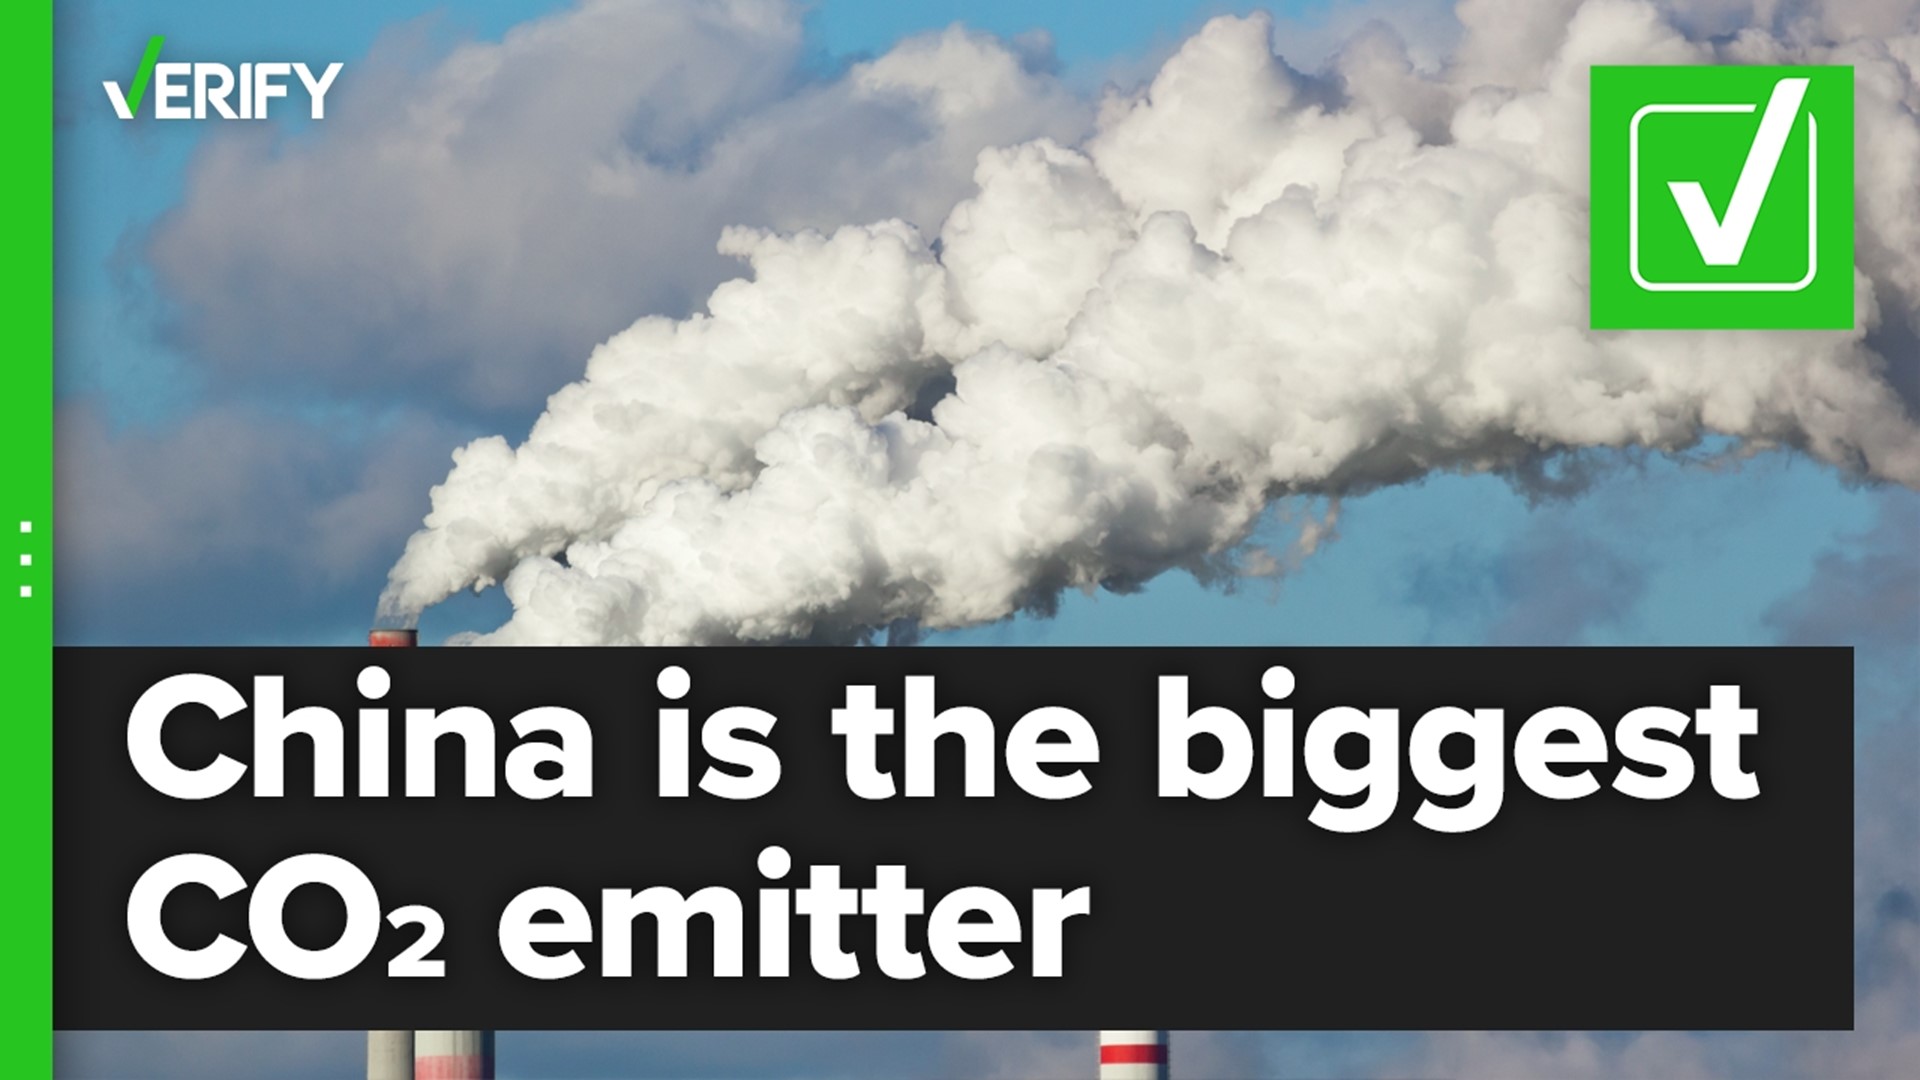 China has emitted the most carbon dioxide every year since 2006. Prior to that, the United States was the biggest annual emitter of carbon dioxide.